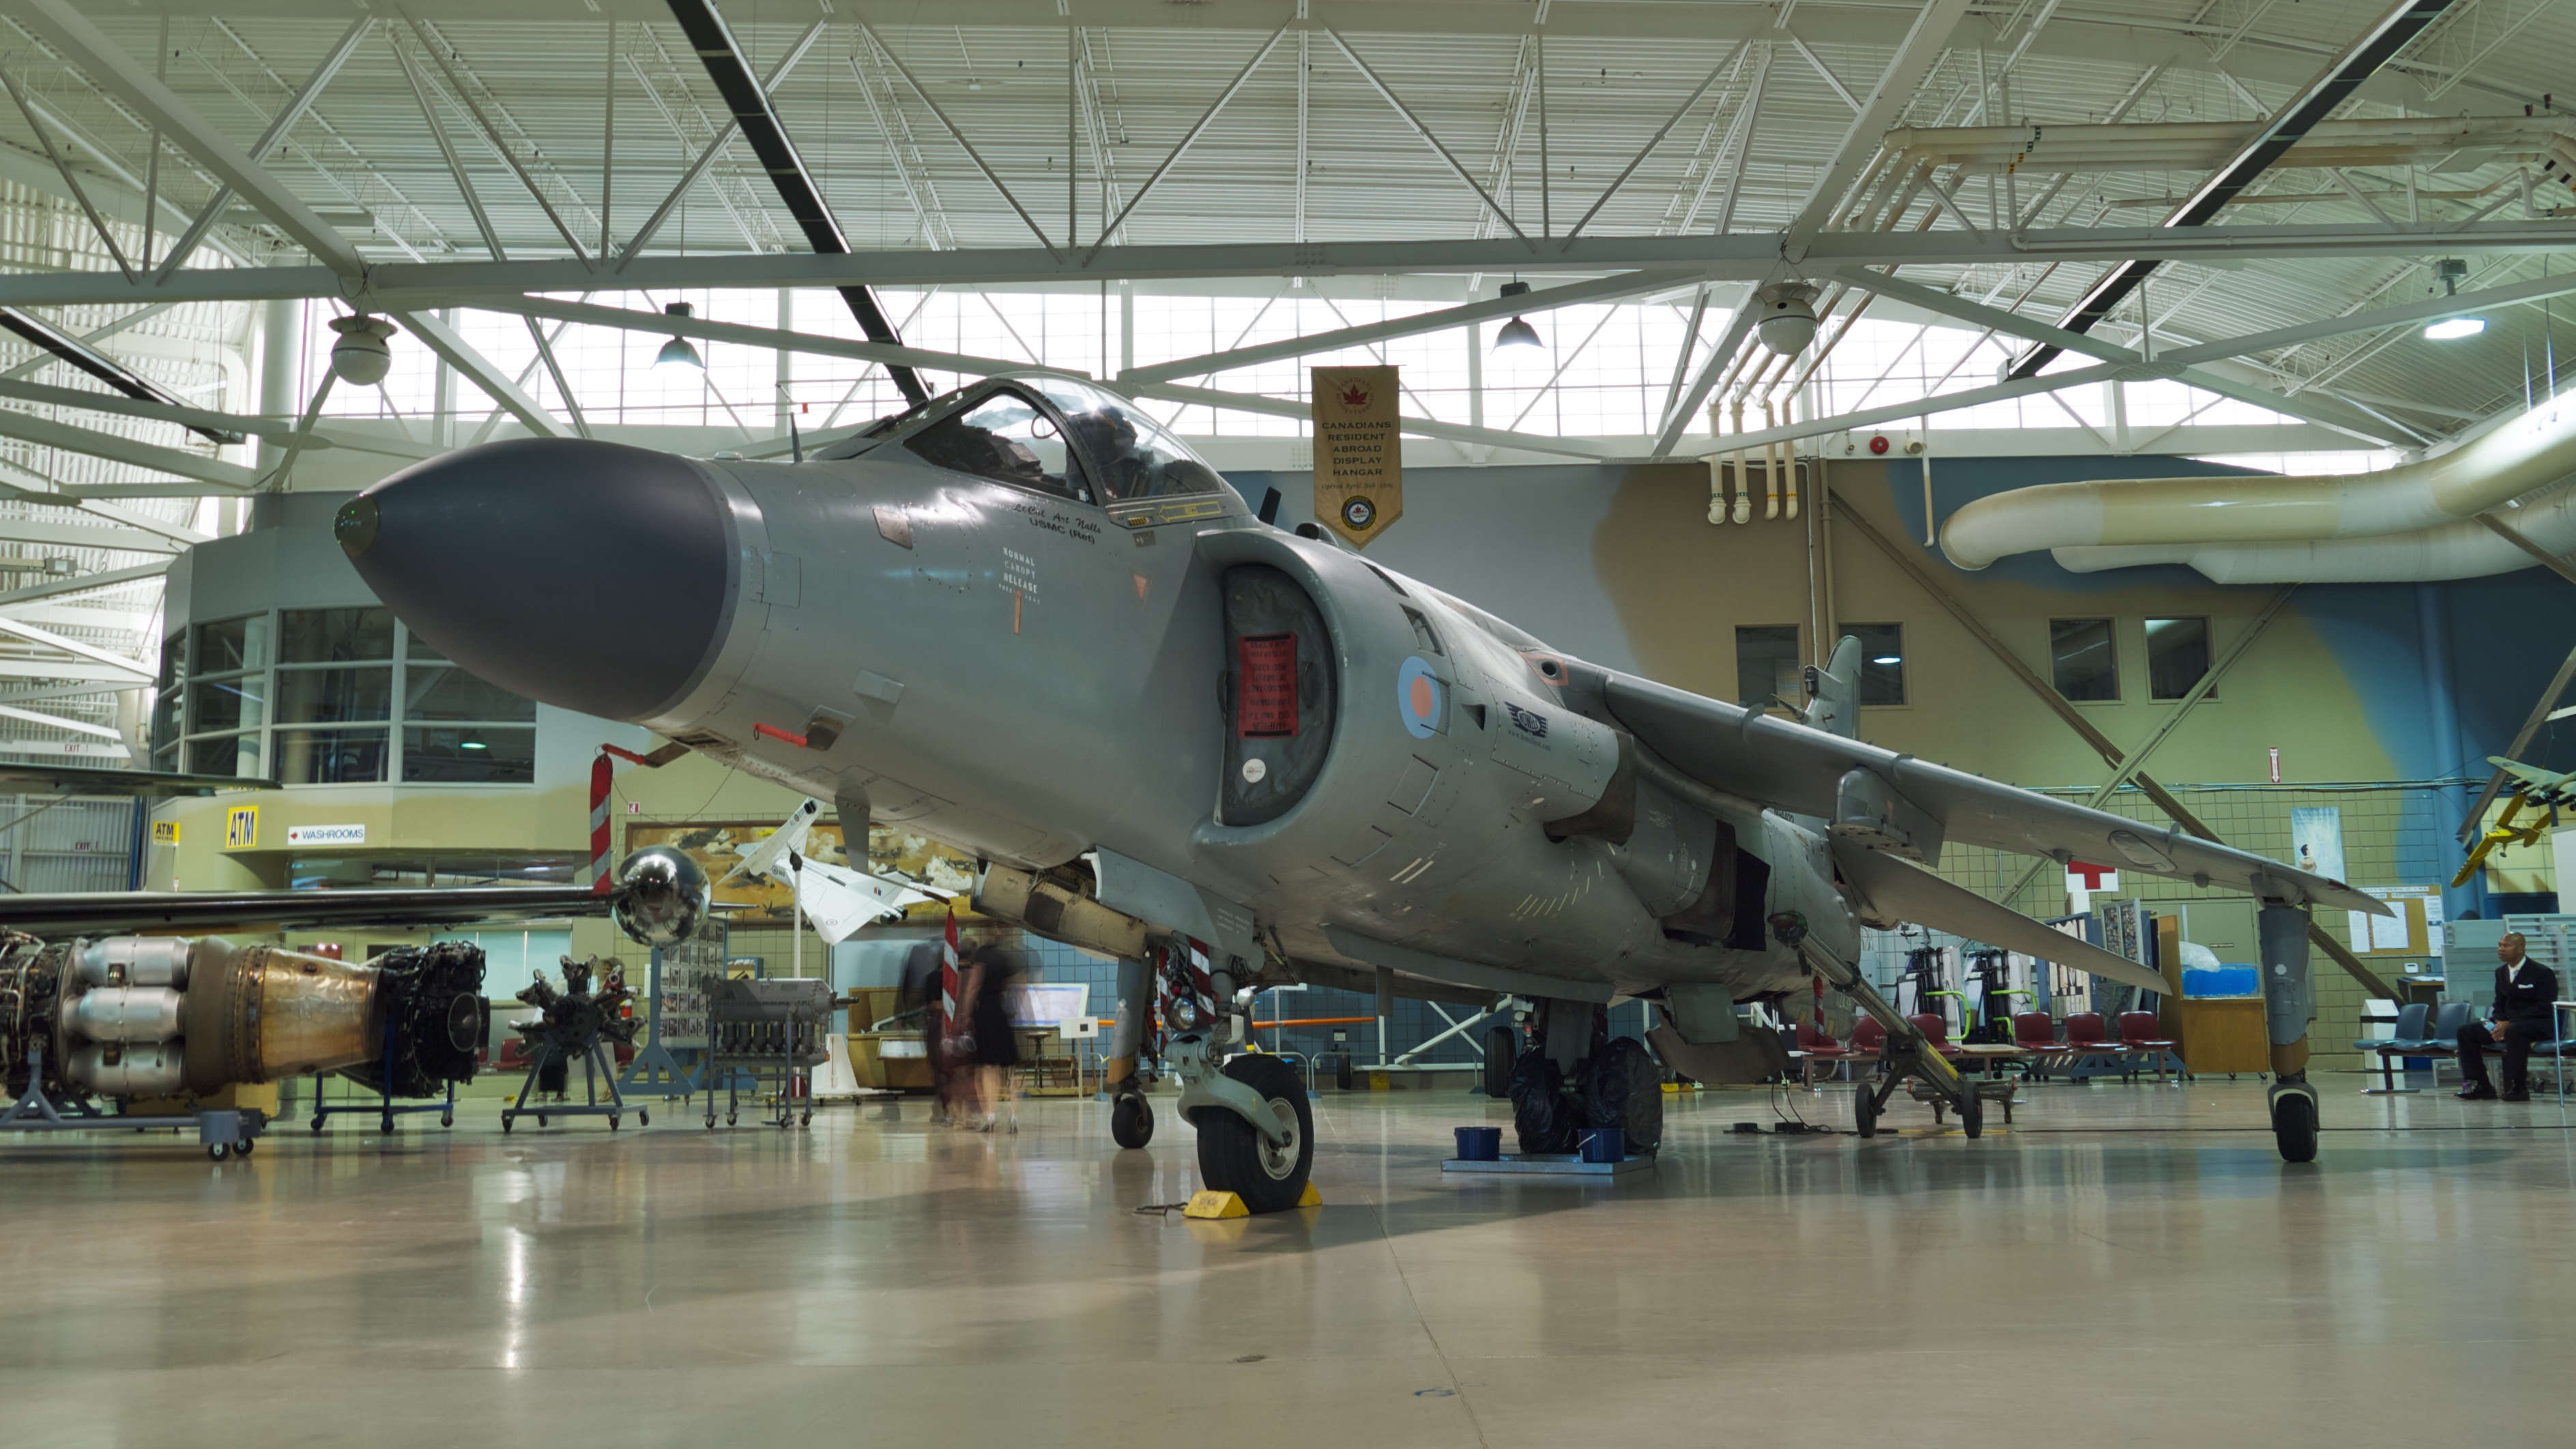 Sea Harrier Museum will be the latest addition to tourist spots in Vizag